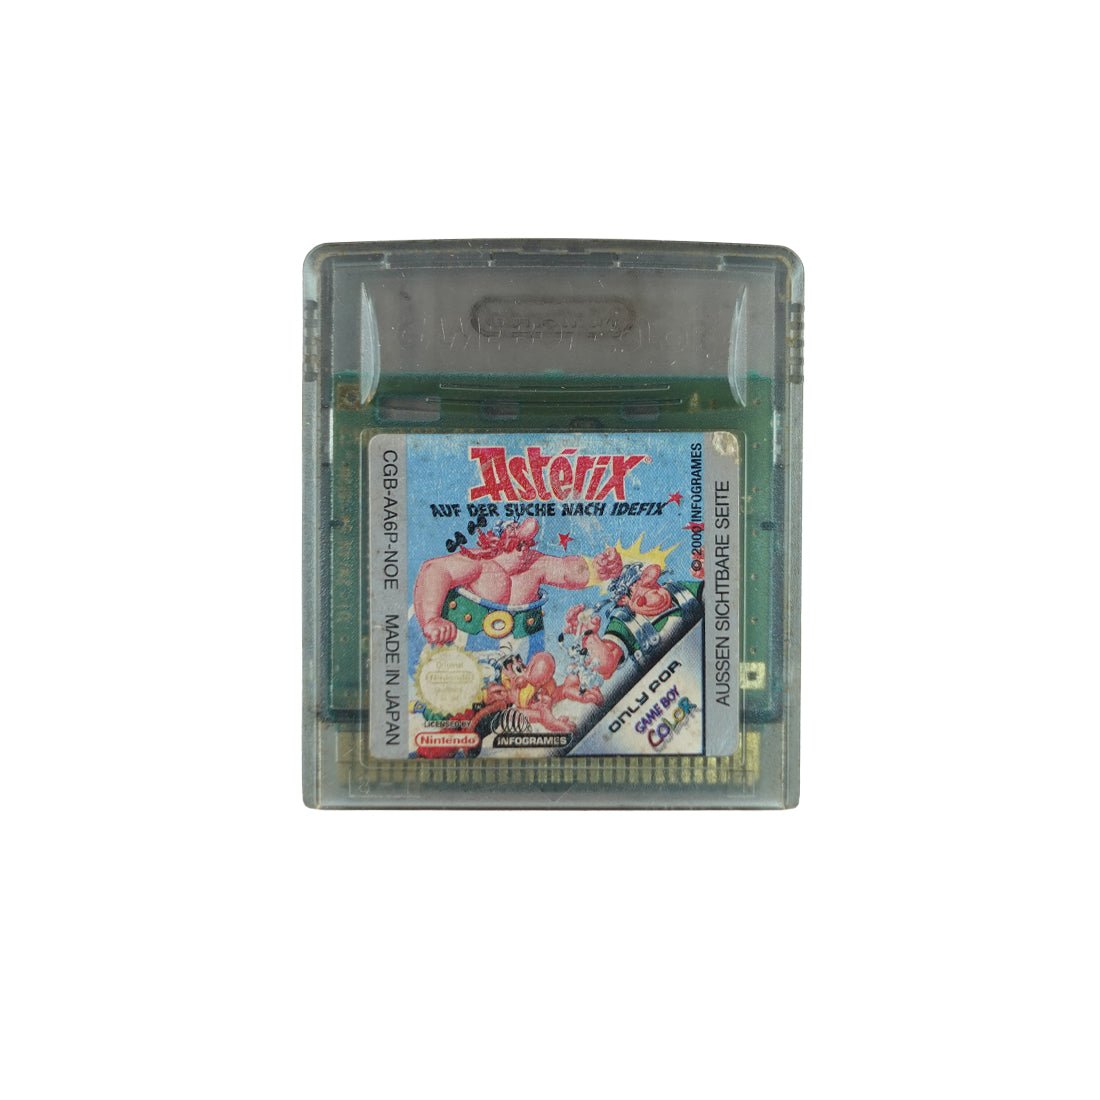 (Pre-Owned) Asterix - Gameboy Color - ريترو - Store 974 | ستور ٩٧٤